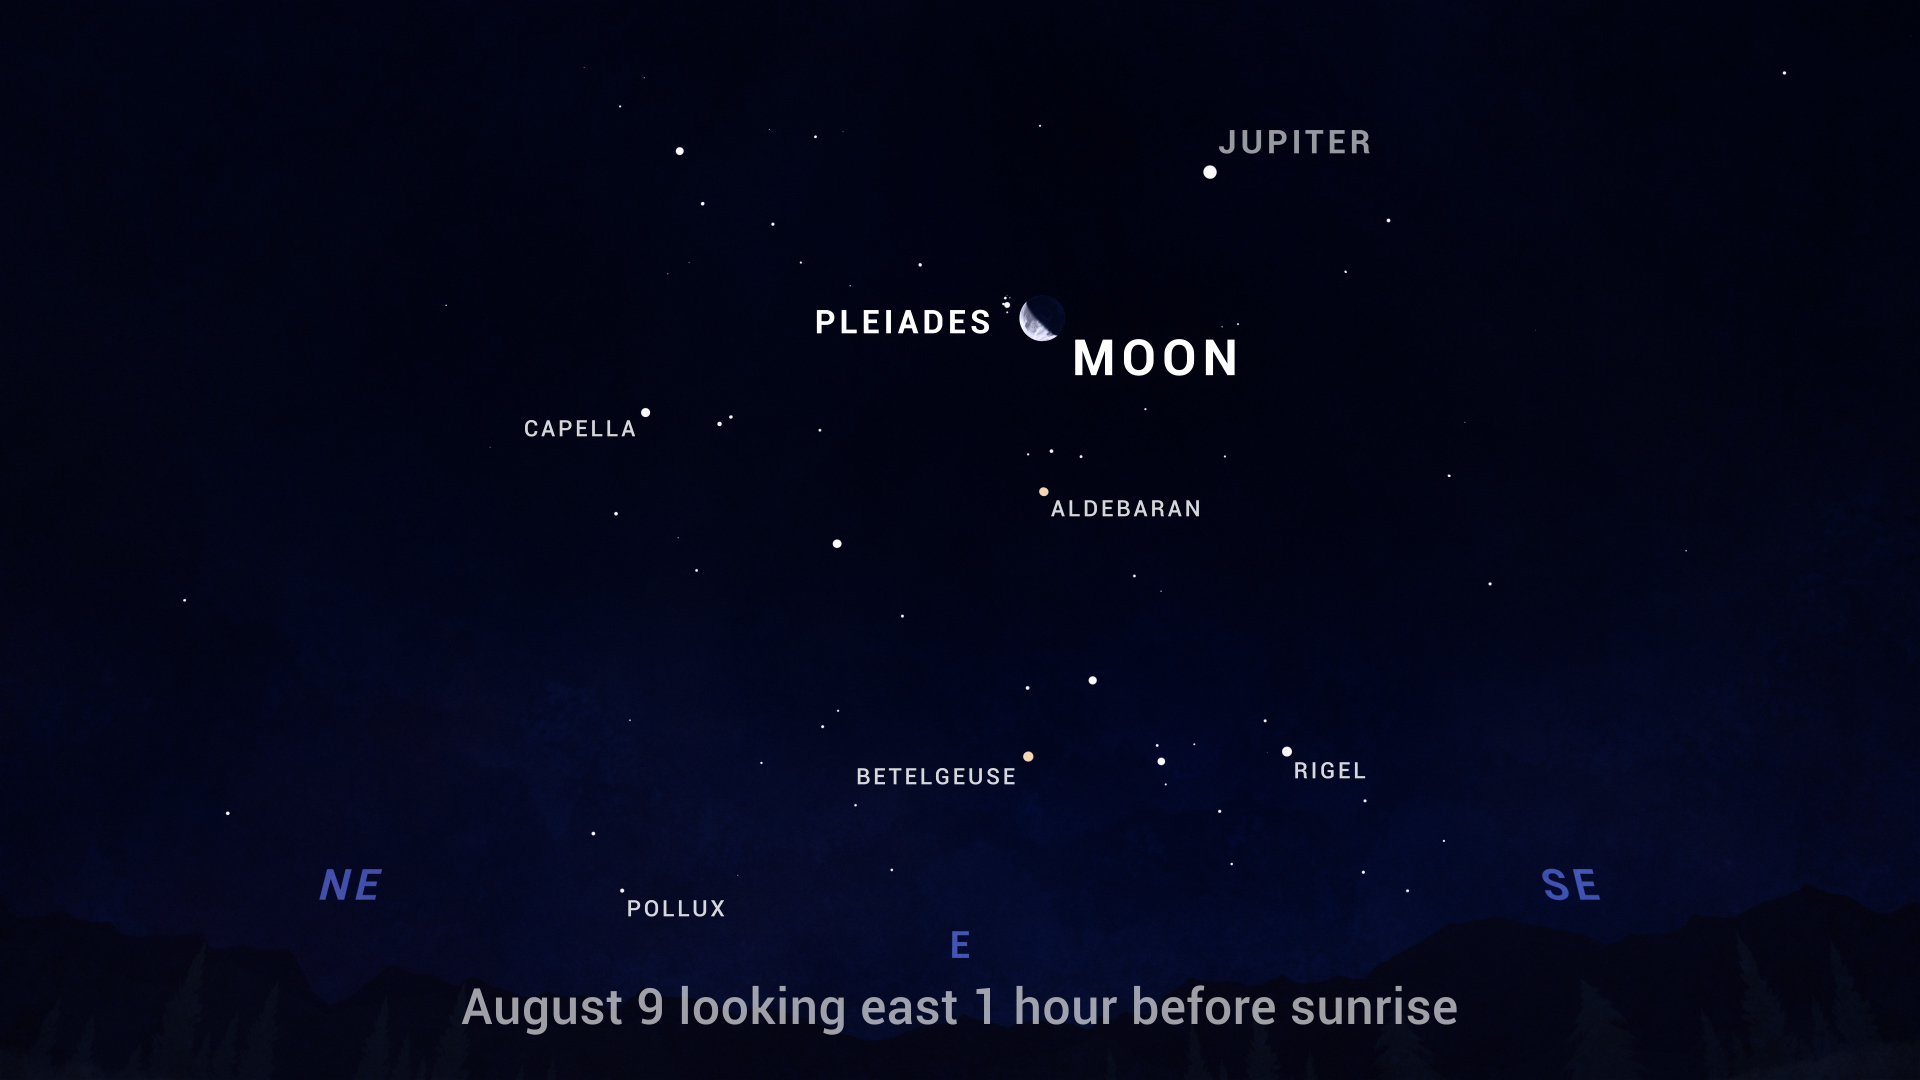 An illustrated sky chart shows the pre-dawn sky facing east, one hour before sunrise on August 9. The half-full Moon appears above center, just to the right of a cluster of small white dots representing the stars of the Pleiades star cluster. Jupiter is a bright dot above them. Several other bright stars are labeled on the sky as well.